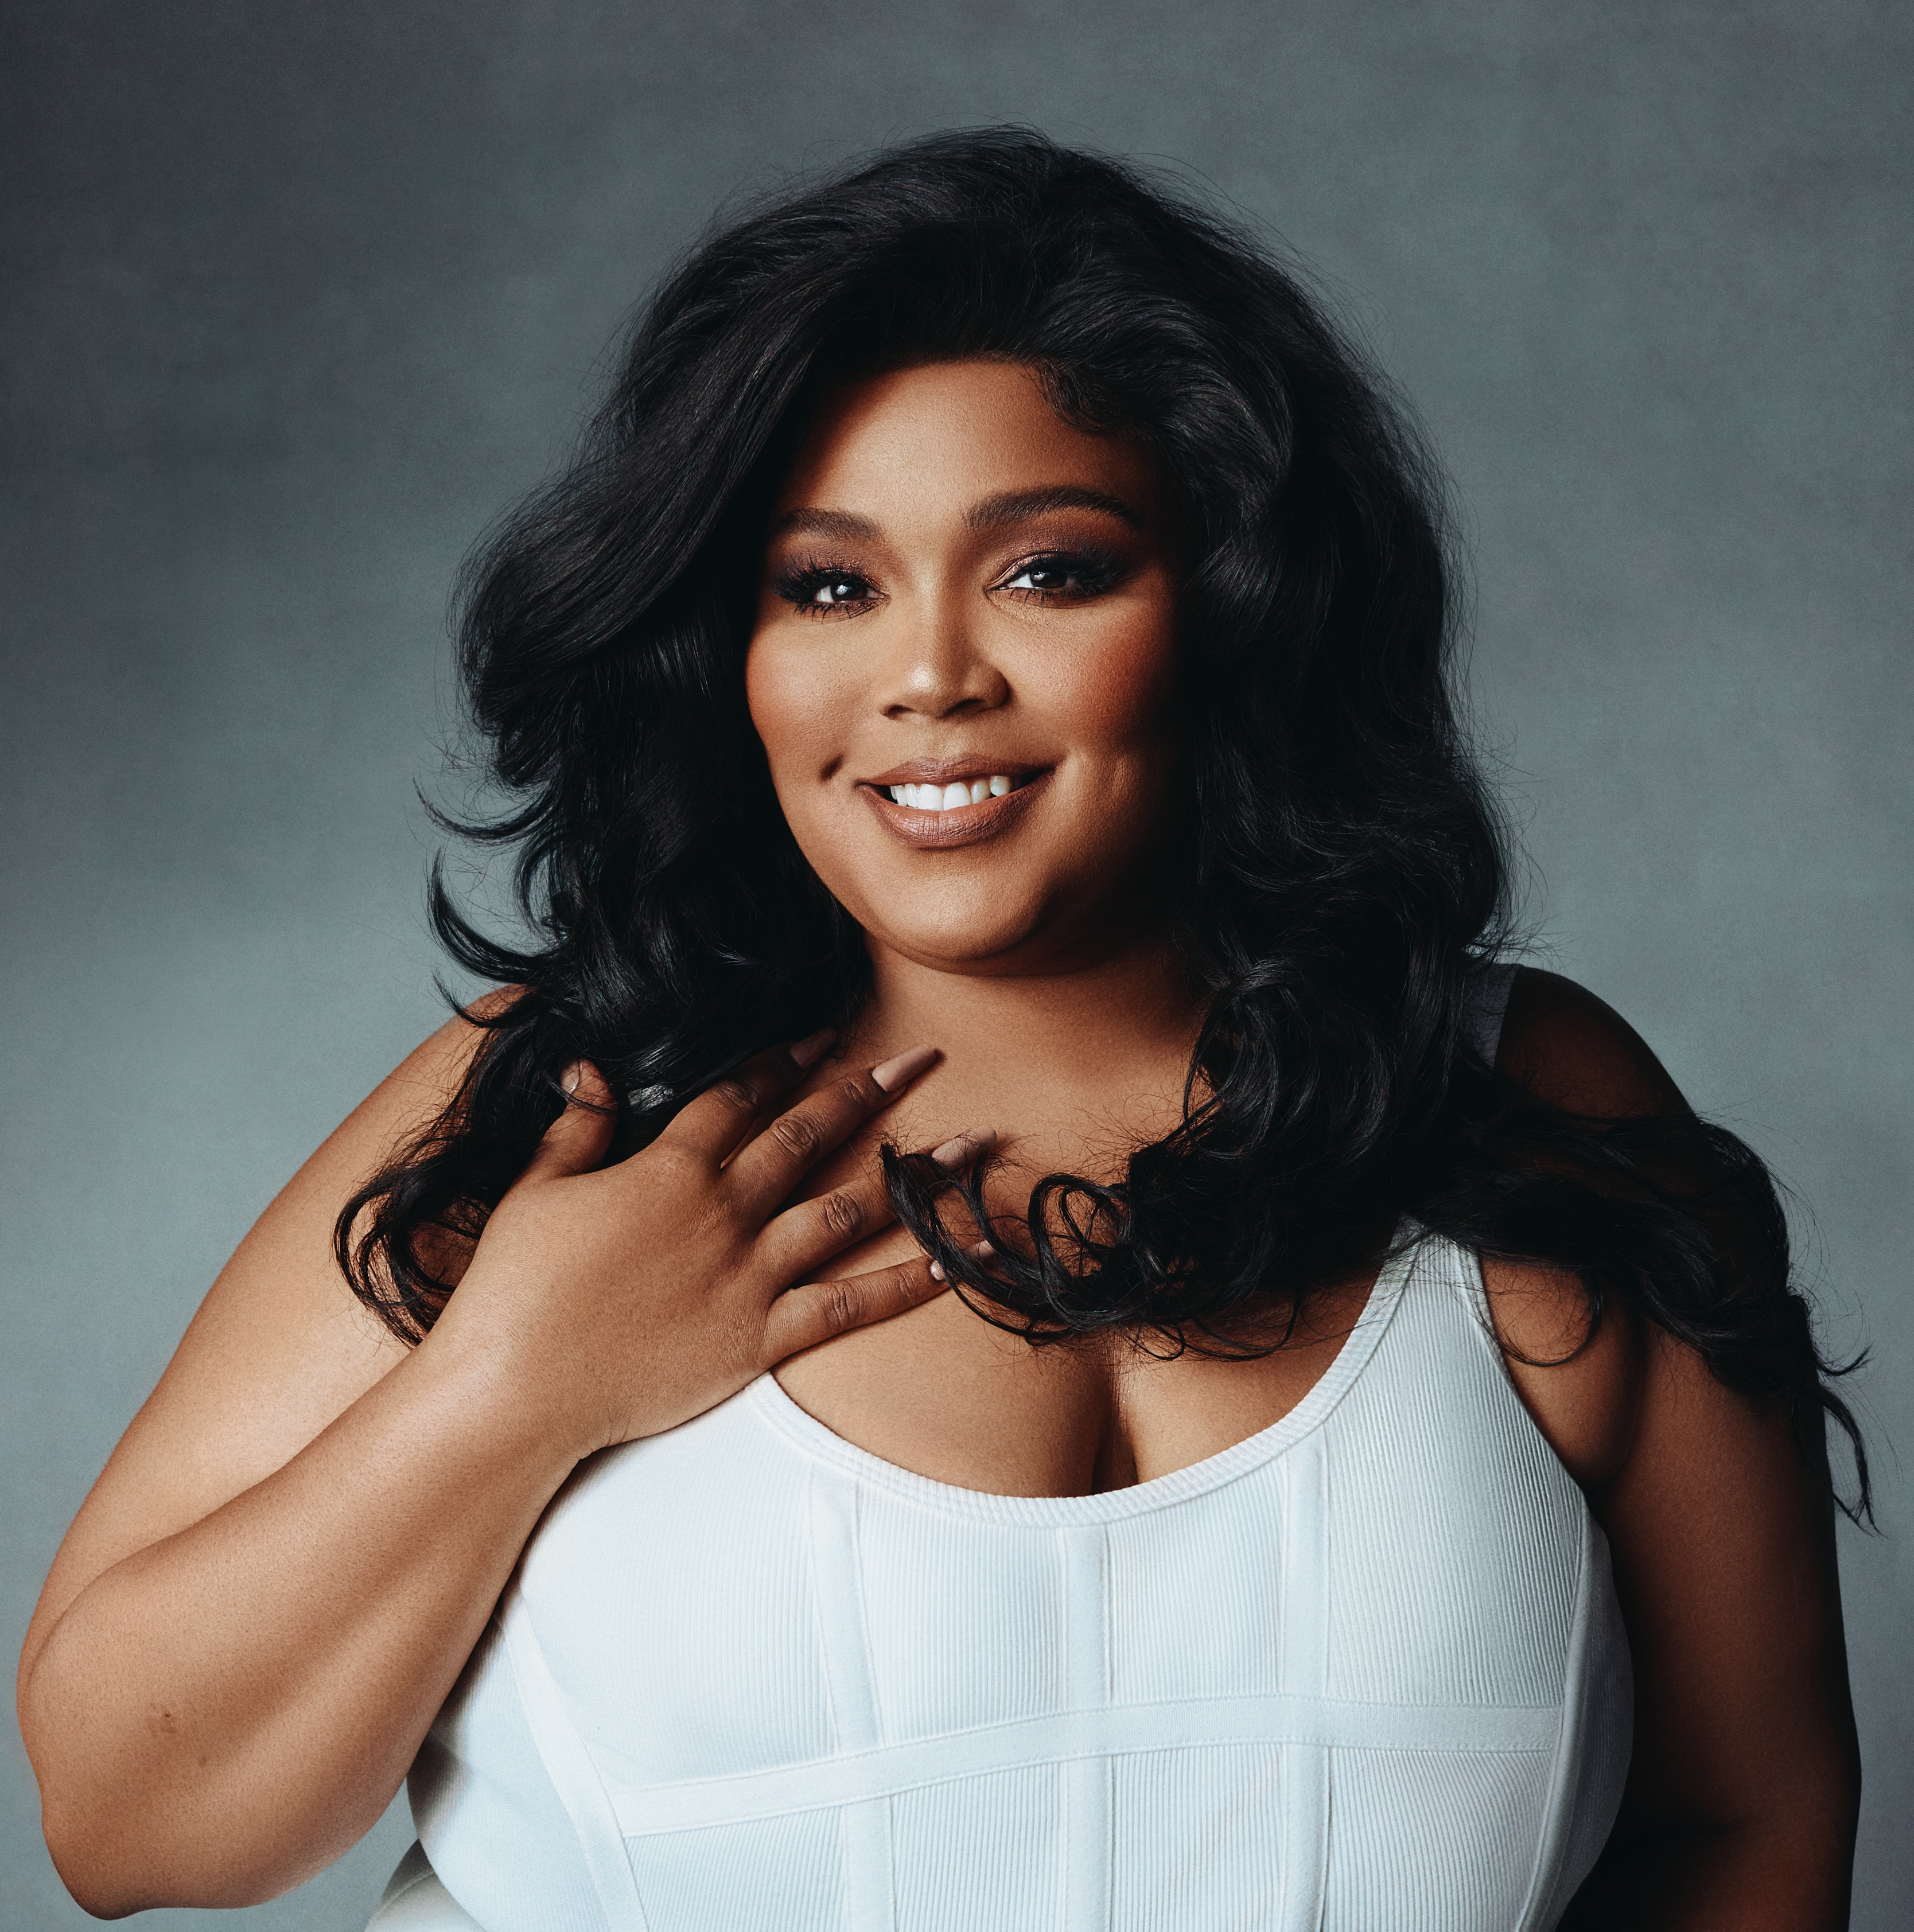 Today, Lizzo’s hit song “About D*mn Time” reached No. 1 on the Billboard Hot 100 chart for the week of July 30. Charts will be updated on Billboard tomorrow, July 26.